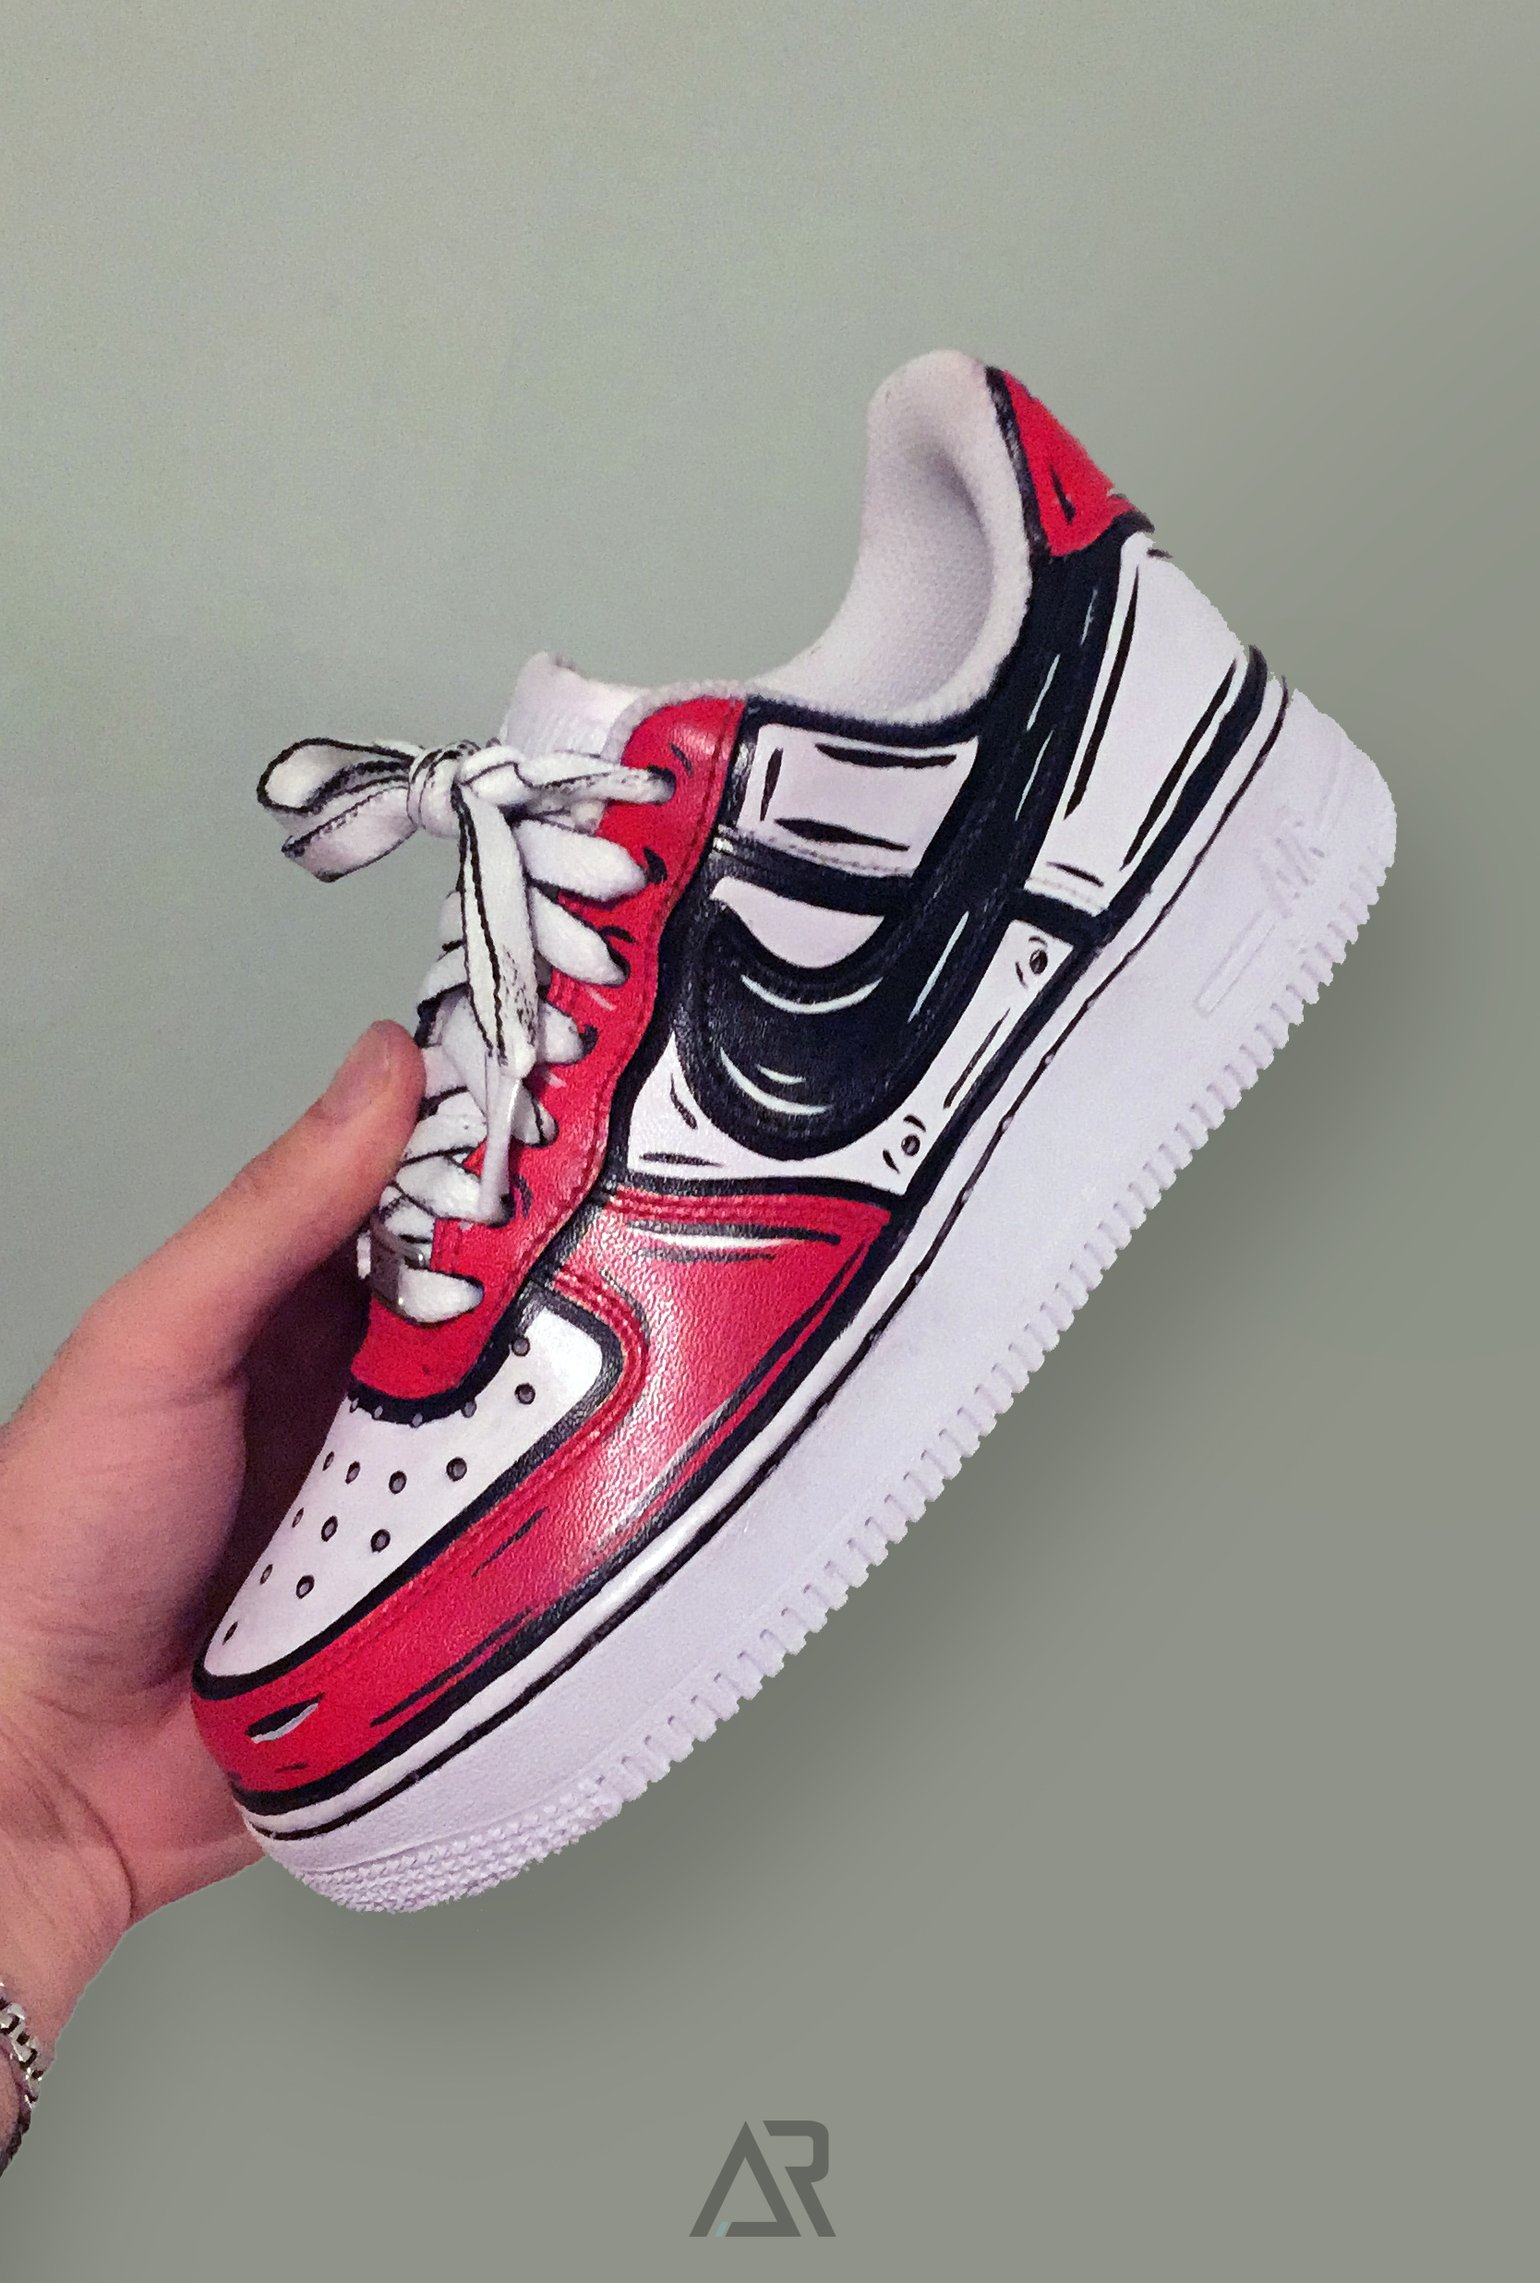 Sketch Effect x Nike Air Force 1 | a.r.graphics